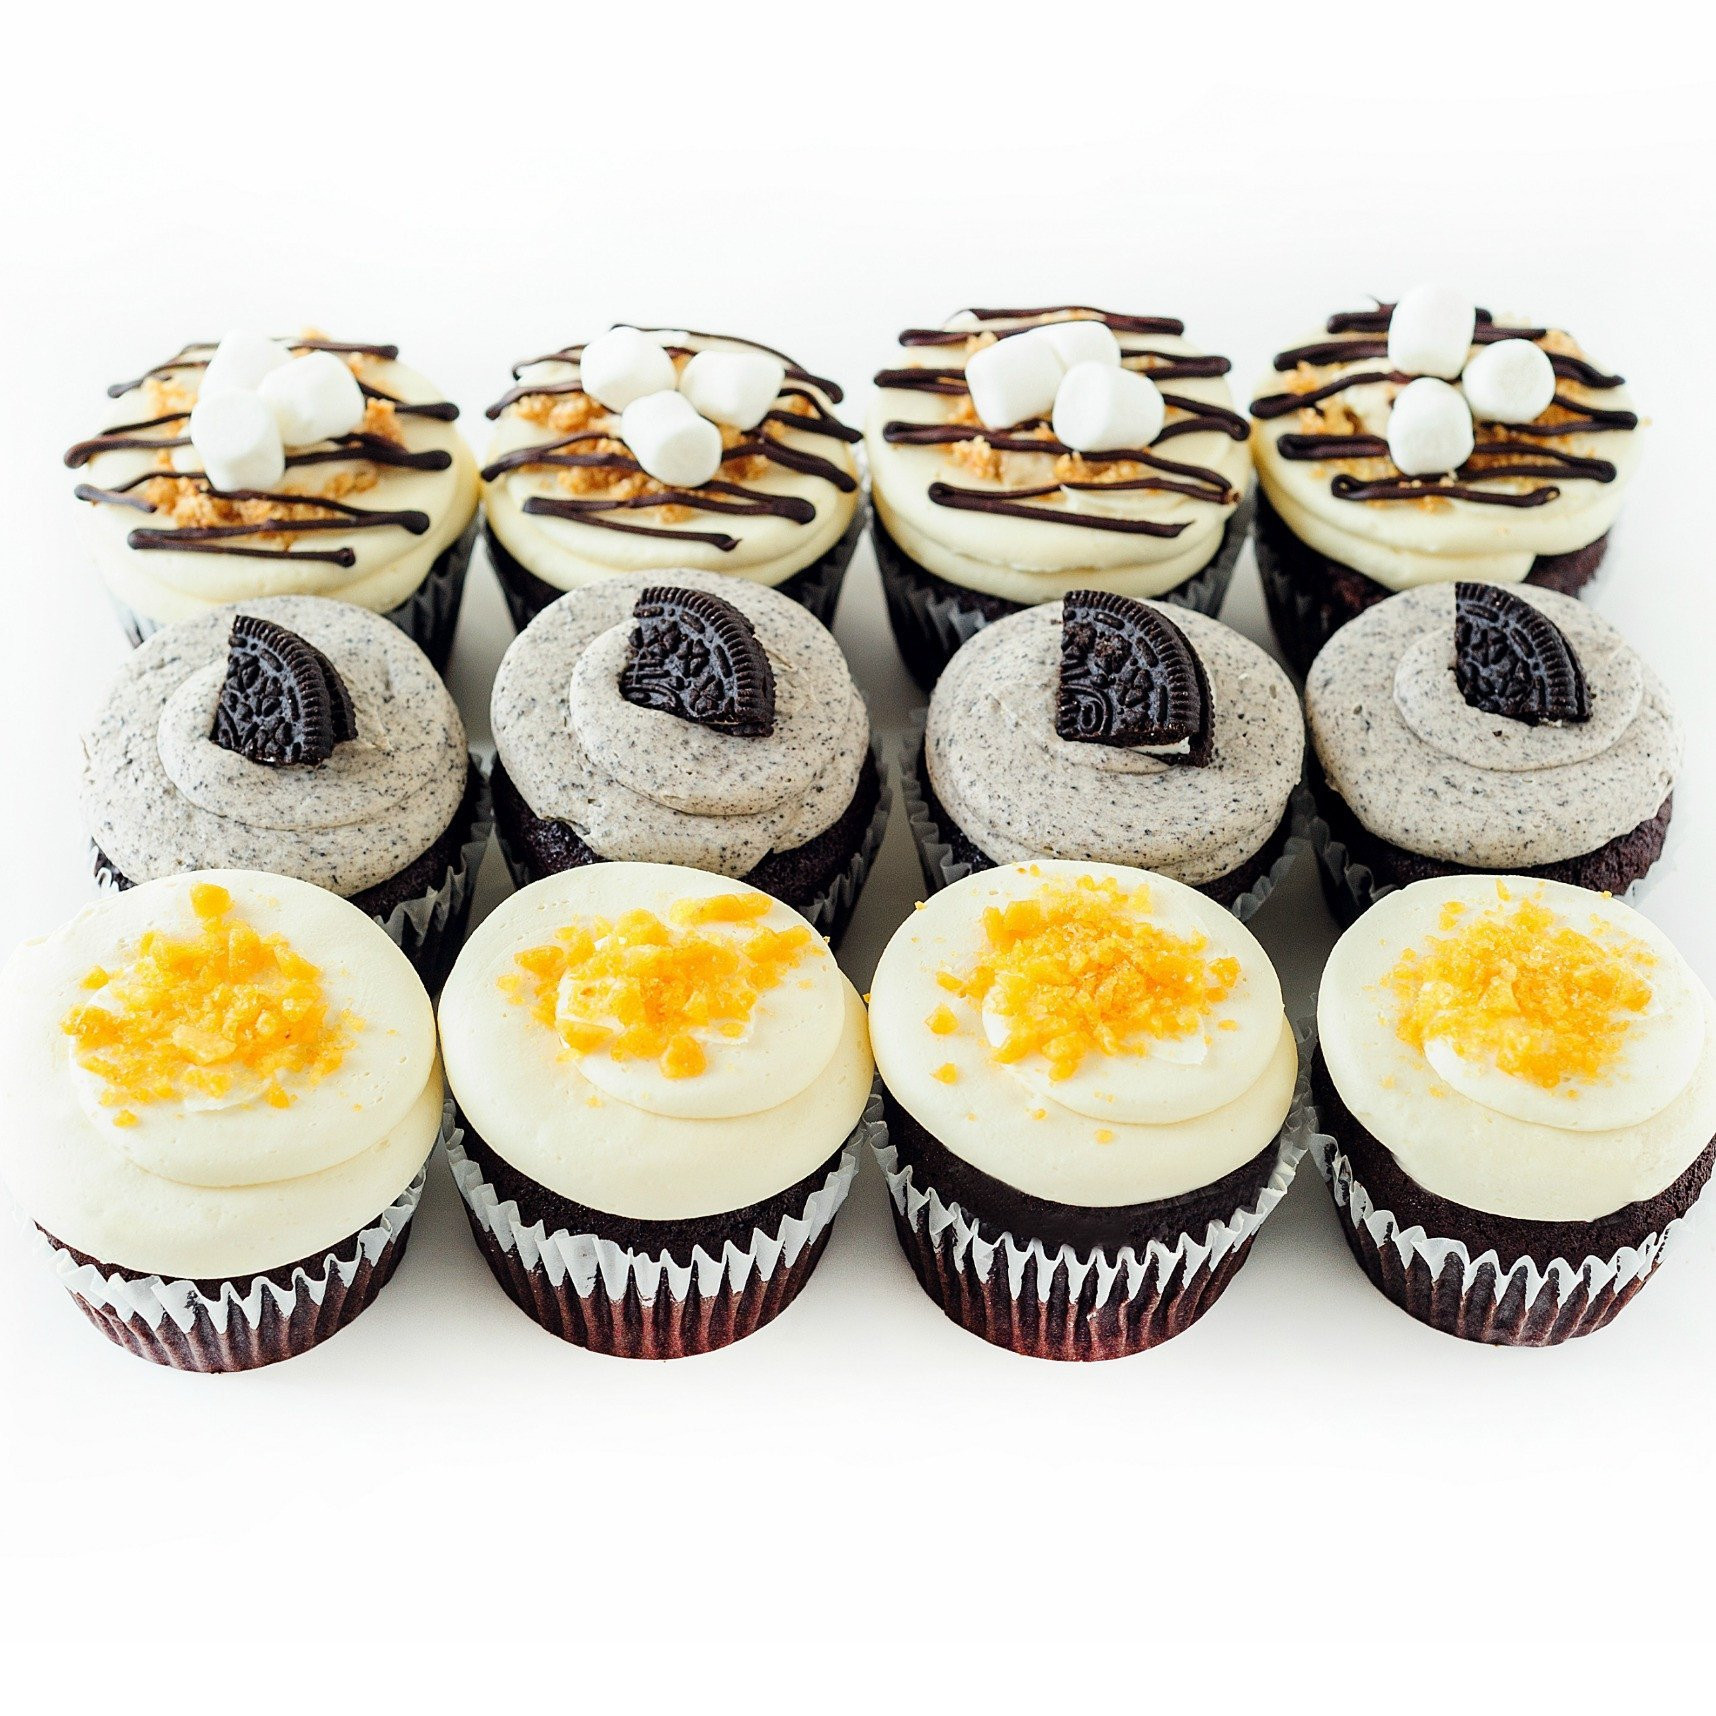 Gourmet Cupcakes Delivered
 Gourmet Cupcakes Cupcake Delivery